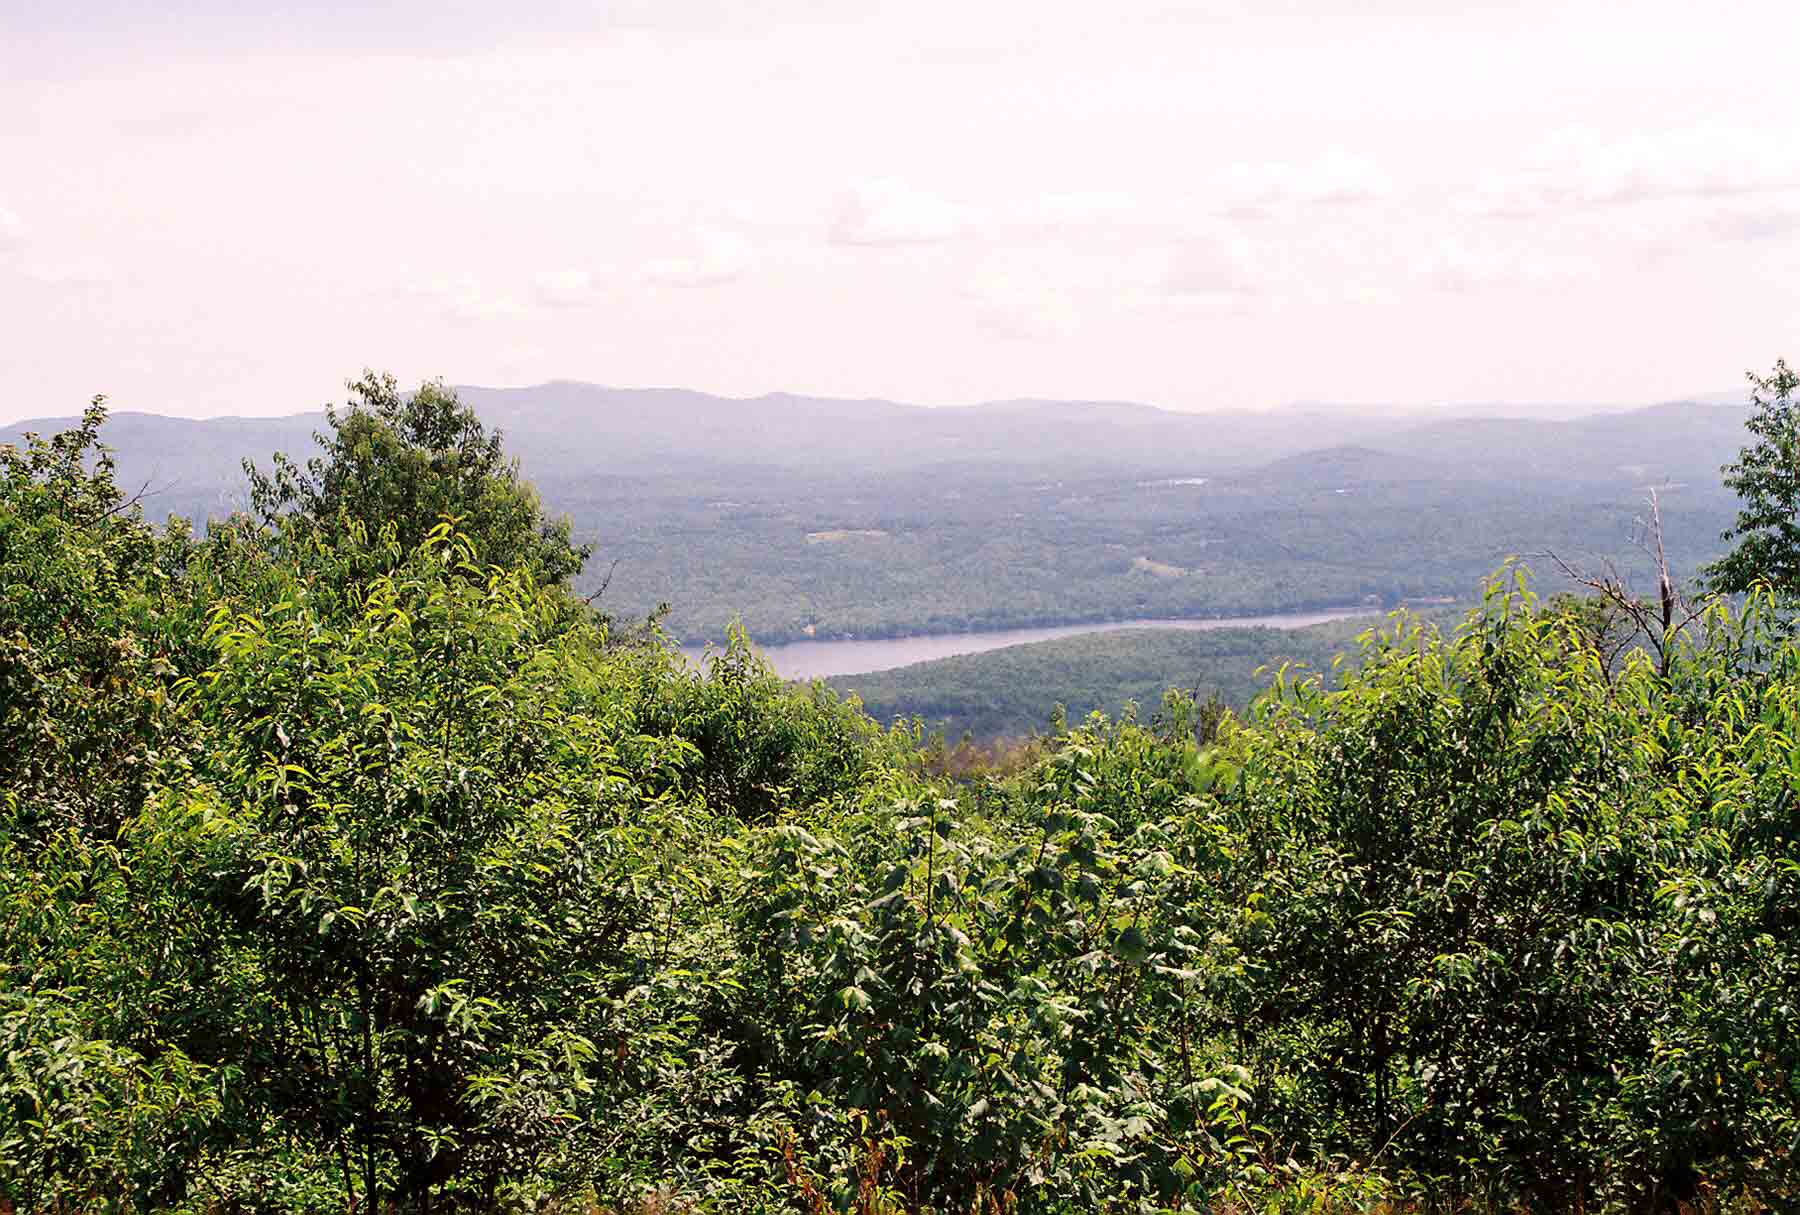 mm 7.4 - View from summit of South Moose Mt. Courtesy dlcul@conncoll.edu